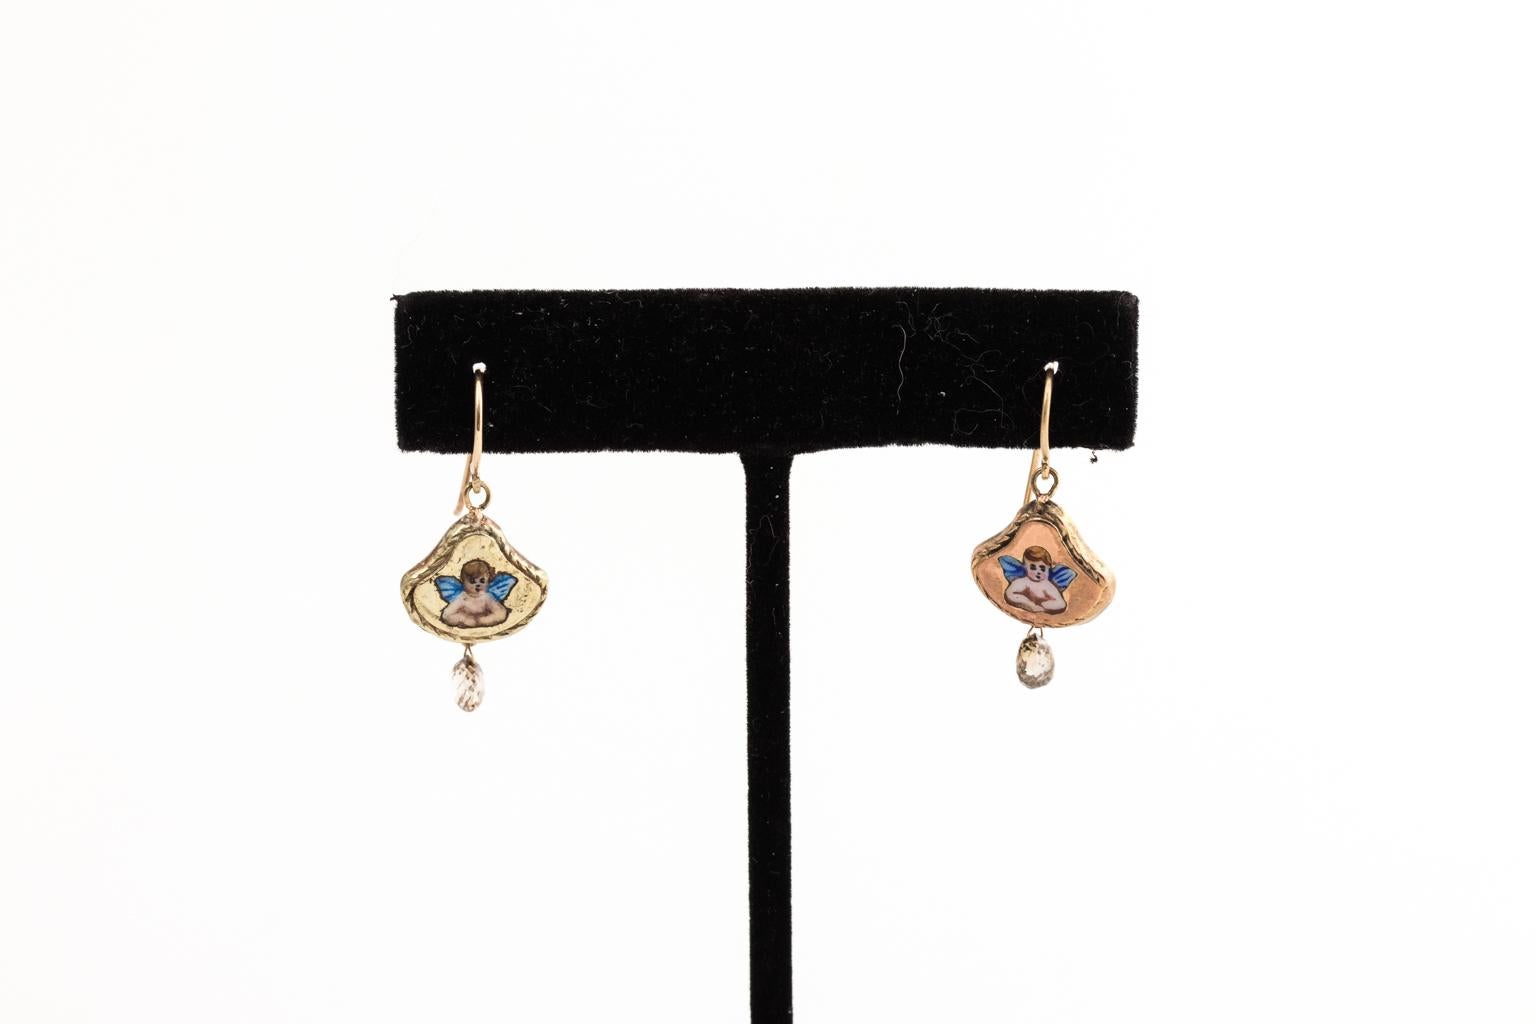 Circa early 1900s pair of mismatched Enamel painted Angel earrings in 14 karat pink gold and 14 karat yellow gold. Each earring has approximately 0.45 carats of champagne diamonds briolette drops. Hand crafted out of antique materials.
